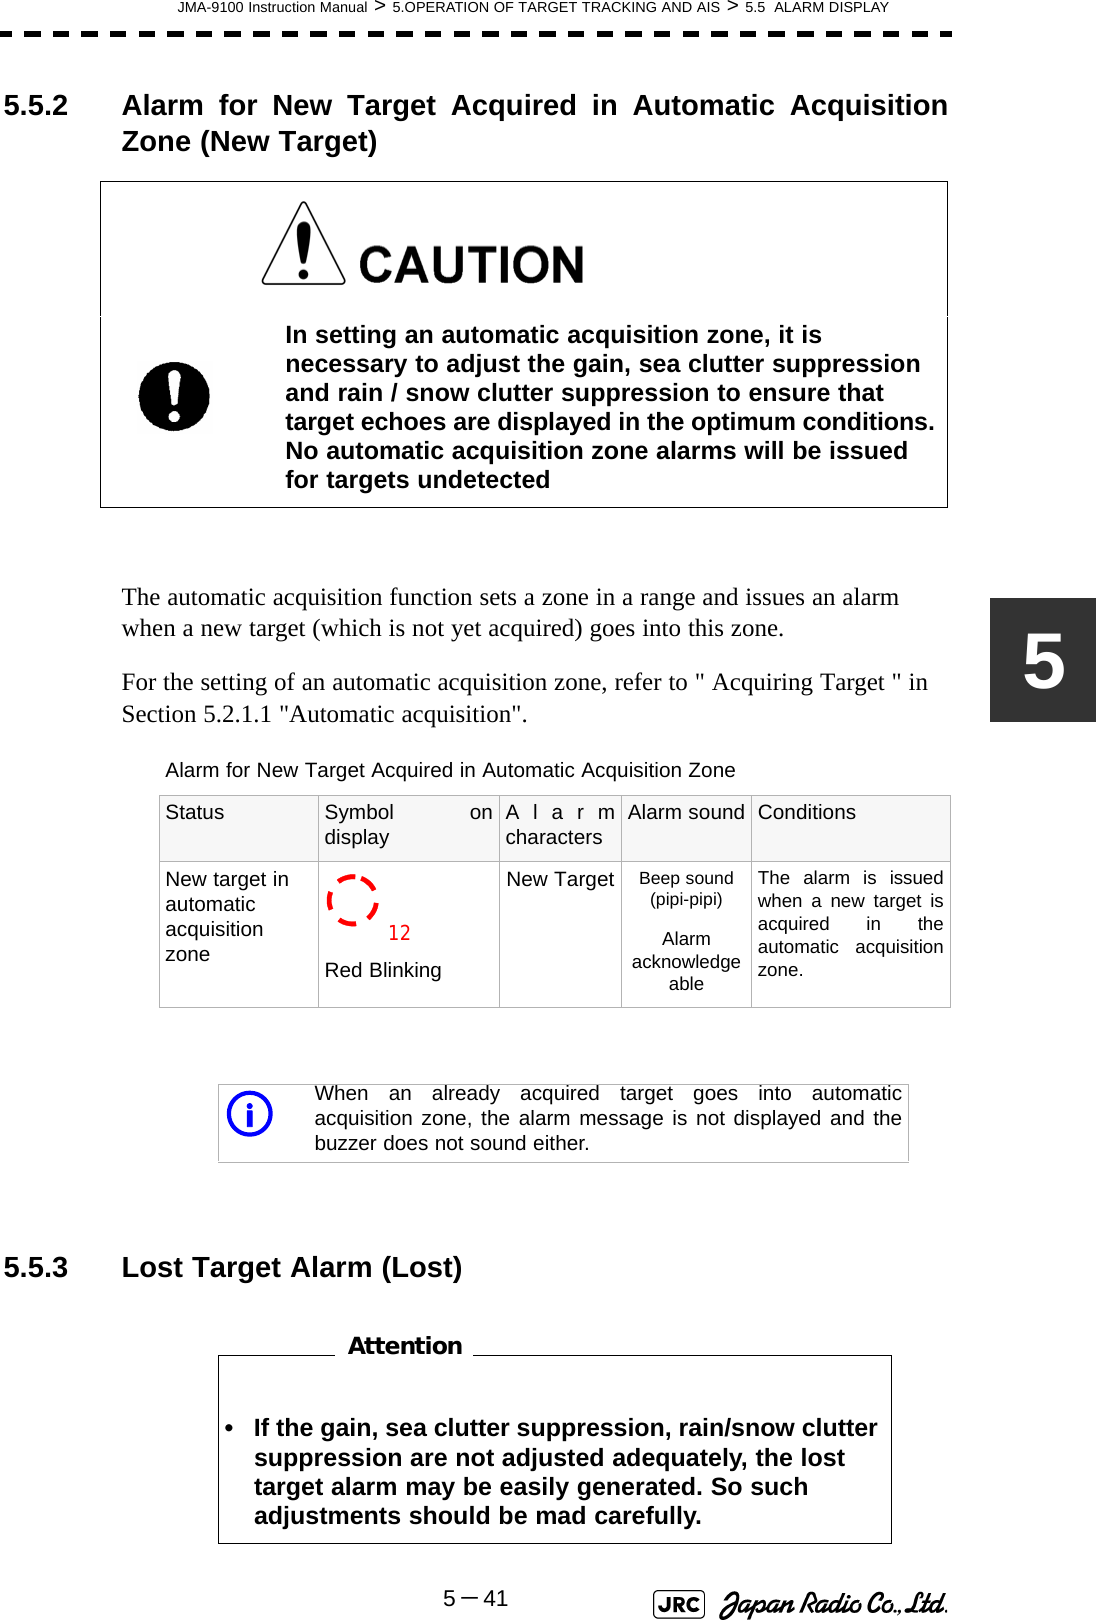 JMA-9100 Instruction Manual &gt; 5.OPERATION OF TARGET TRACKING AND AIS &gt; 5.5  ALARM DISPLAY5－4155.5.2 Alarm for New Target Acquired in Automatic AcquisitionZone (New Target)The automatic acquisition function sets a zone in a range and issues an alarm when a new target (which is not yet acquired) goes into this zone.For the setting of an automatic acquisition zone, refer to &quot; Acquiring Target &quot; in Section 5.2.1.1 &quot;Automatic acquisition&quot;. 5.5.3 Lost Target Alarm (Lost)　　　　　　　　In setting an automatic acquisition zone, it is necessary to adjust the gain, sea clutter suppression and rain / snow clutter suppression to ensure that target echoes are displayed in the optimum conditions. No automatic acquisition zone alarms will be issued for targets undetectedAlarm for New Target Acquired in Automatic Acquisition ZoneStatus Symbol ondisplay Alarmcharacters Alarm sound ConditionsNew target in automatic acquisition zone Red BlinkingNew Target Beep sound (pipi-pipi)Alarm acknowledgeableThe alarm is issuedwhen a new target isacquired in theautomatic acquisitionzone.iWhen an already acquired target goes into automaticacquisition zone, the alarm message is not displayed and thebuzzer does not sound either.• If the gain, sea clutter suppression, rain/snow clutter suppression are not adjusted adequately, the lost target alarm may be easily generated. So such adjustments should be mad carefully.12Attention